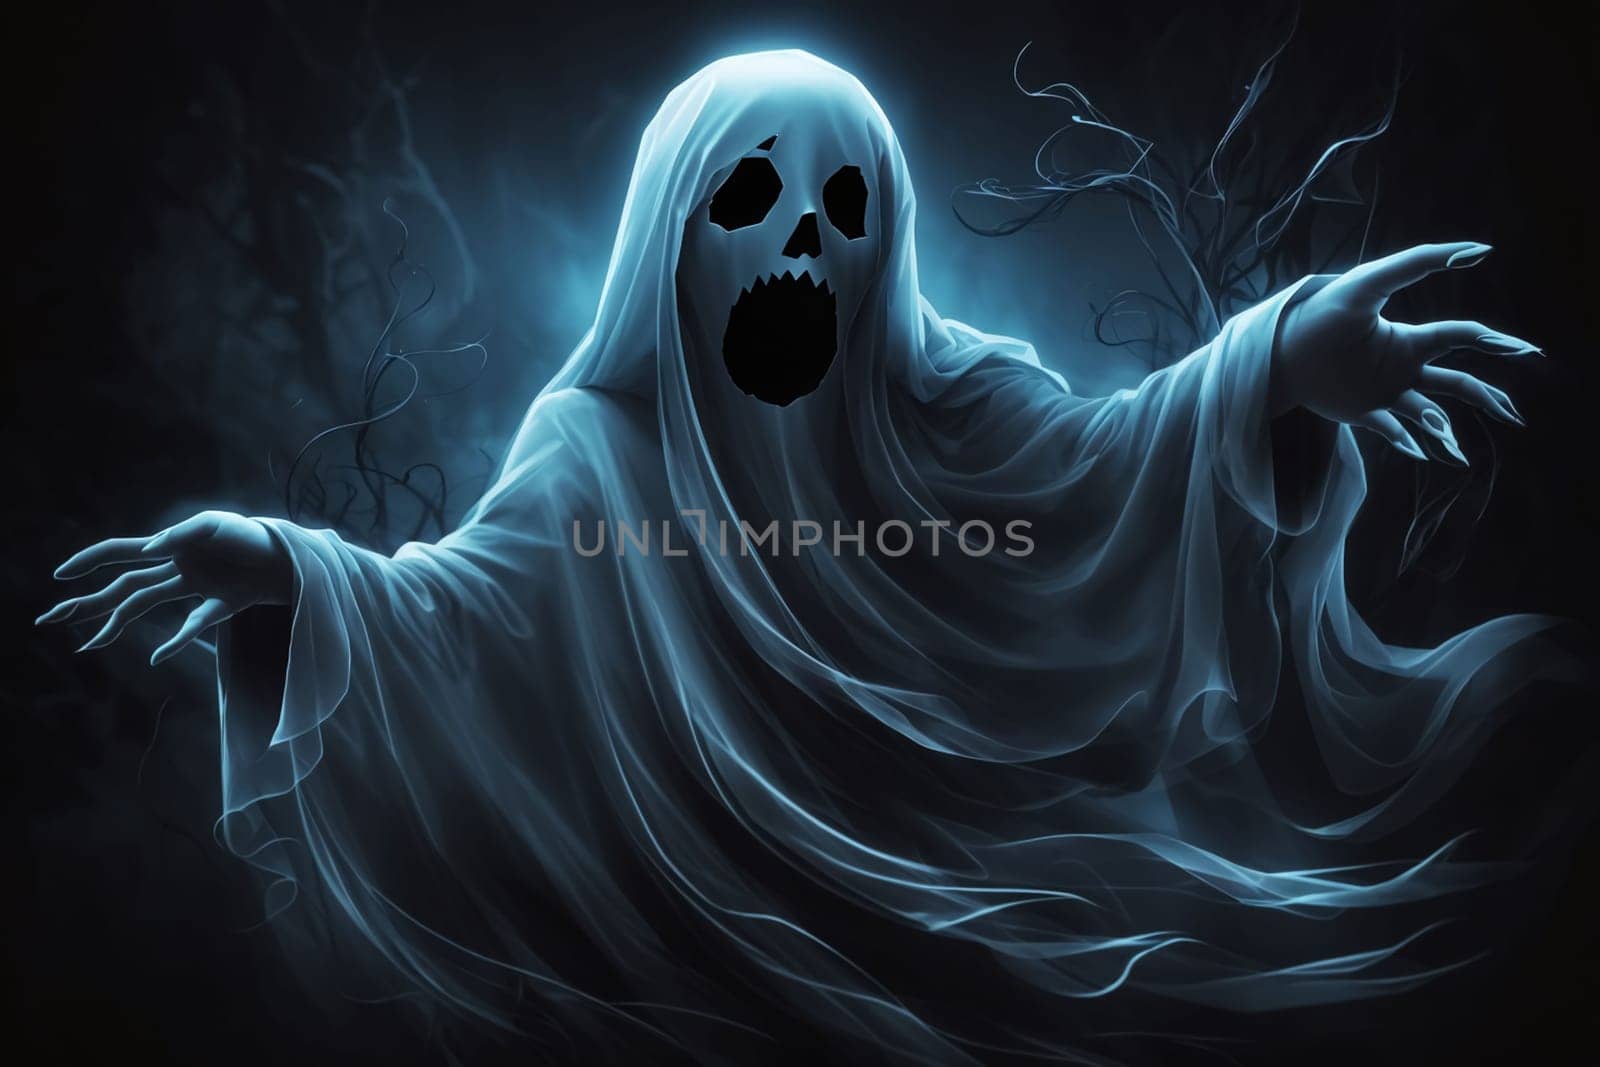 Spooky Halloween Ghost In Spooky dark Night. Holiday event halloween background concept for Halloweens card and content multimedia creation